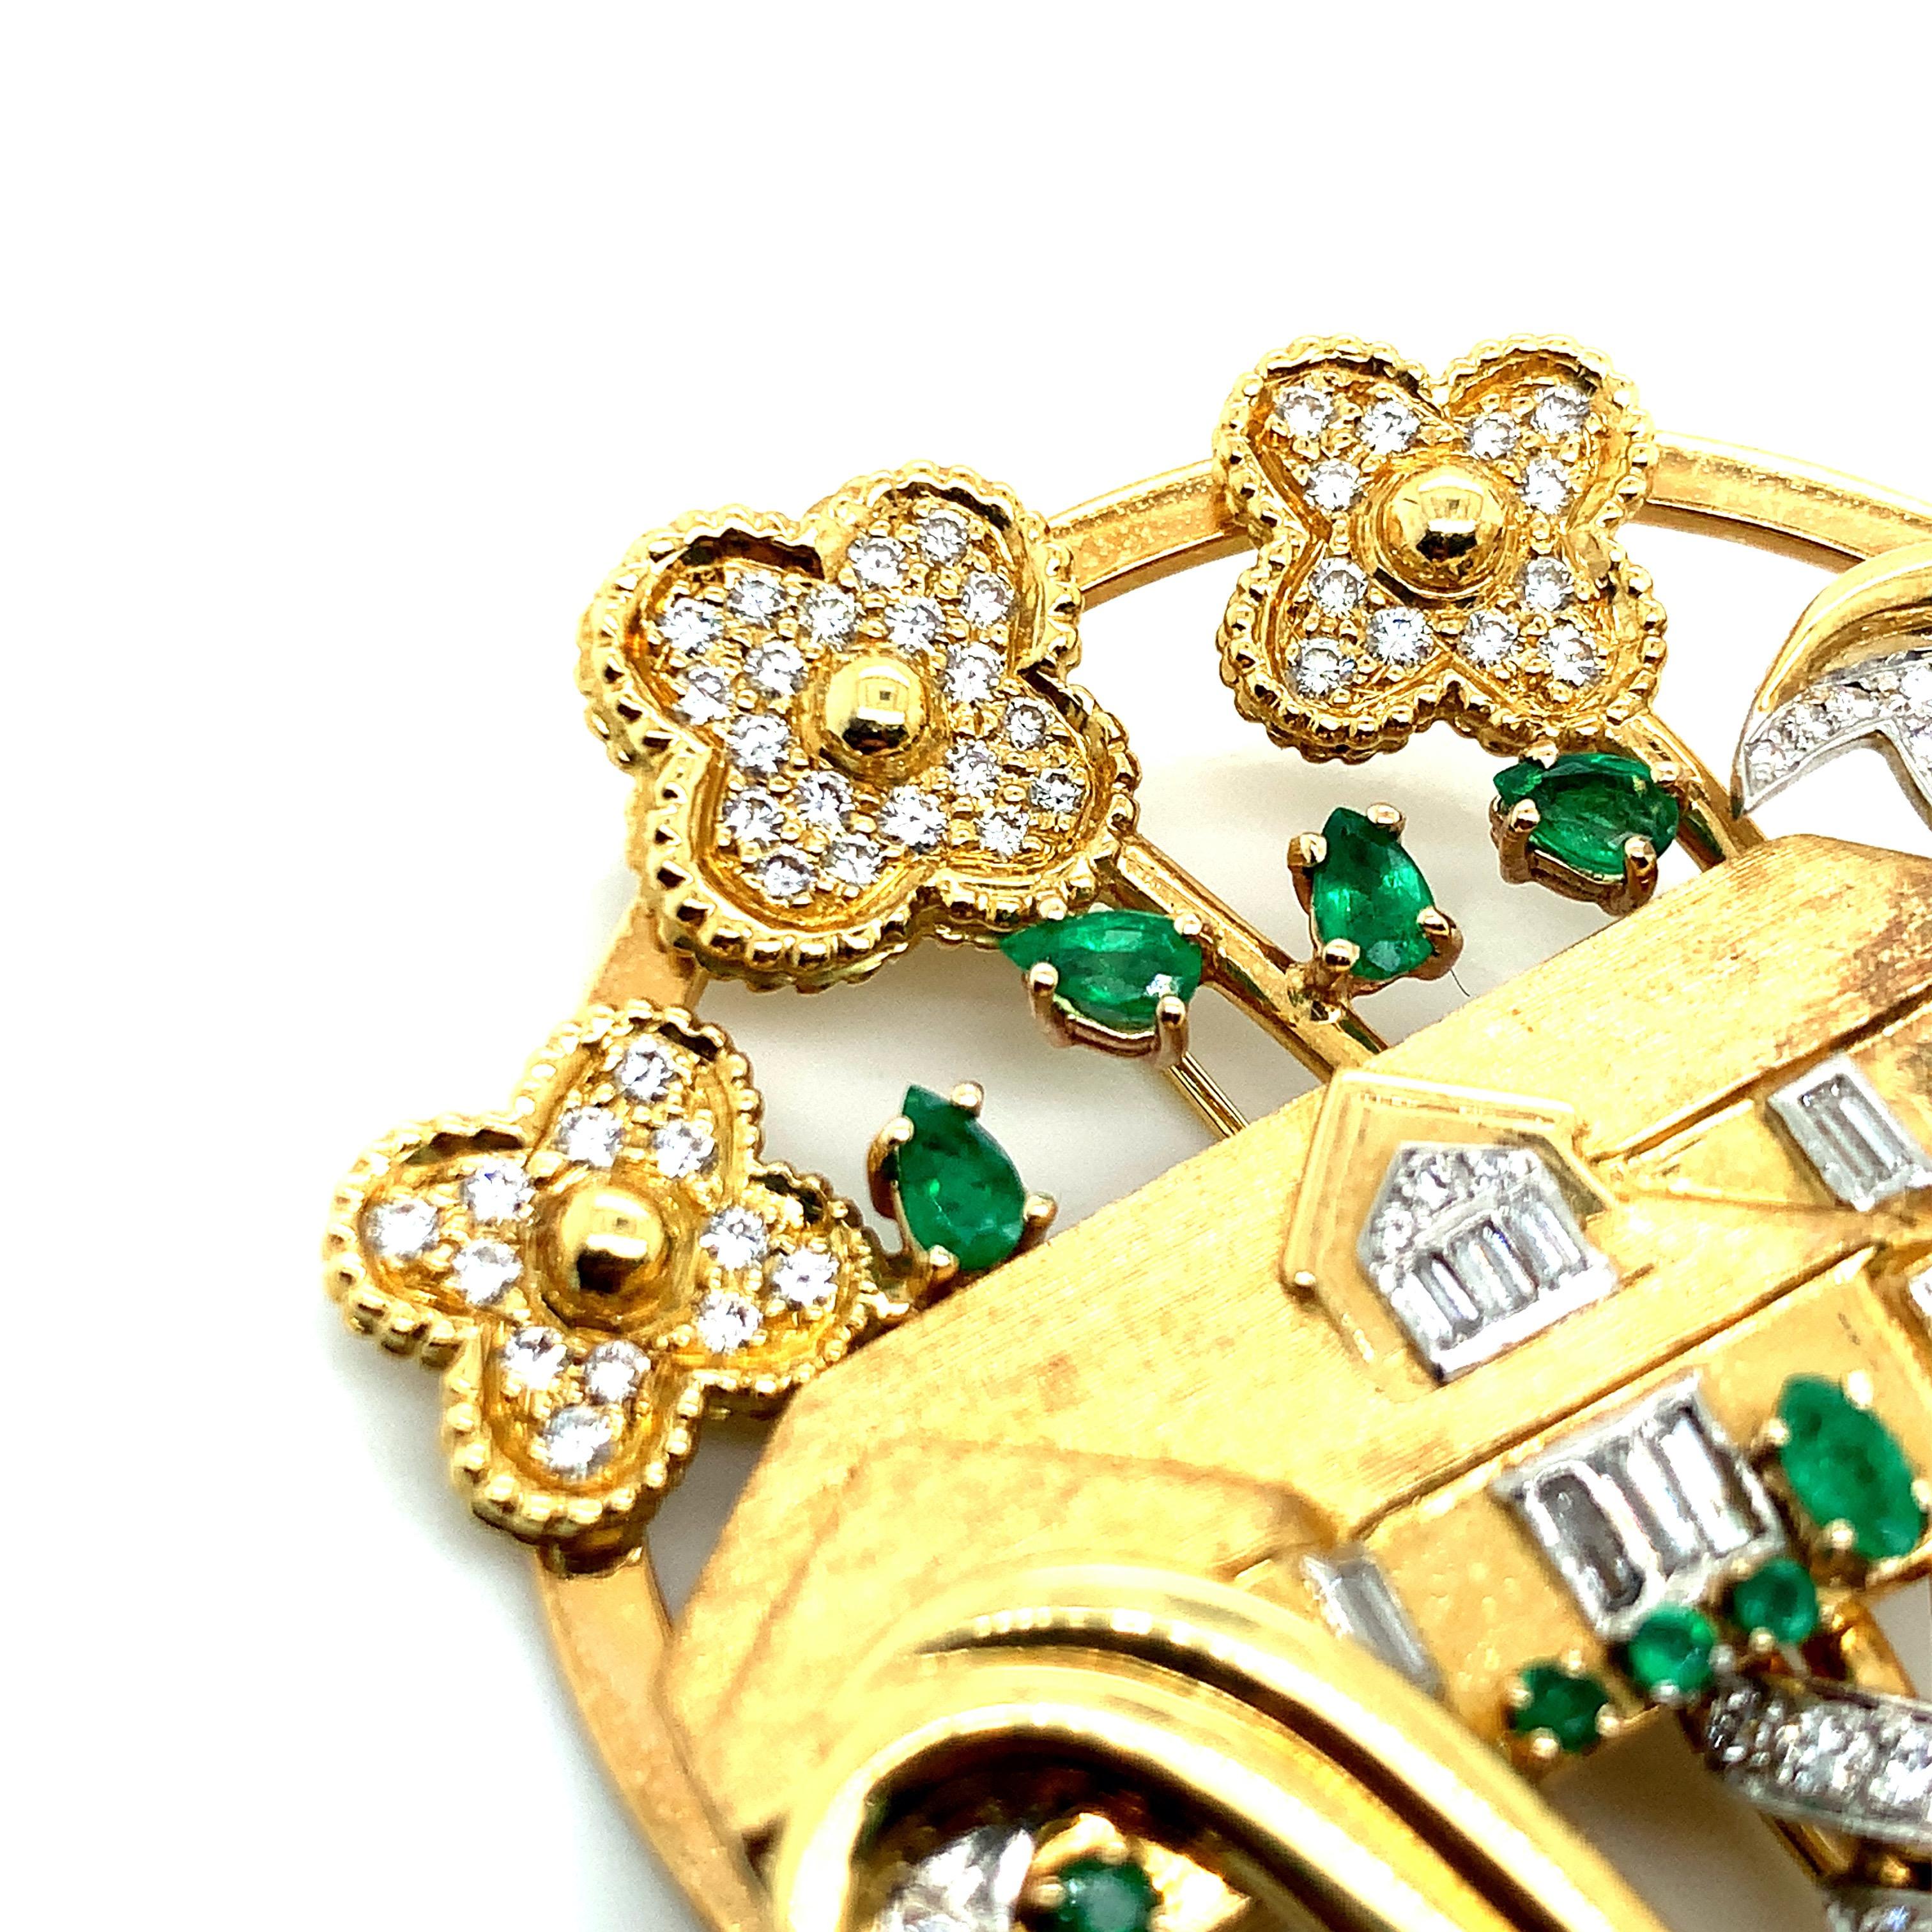 Gold Platinum Diamond Emerald House Brooch In Excellent Condition For Sale In New York, NY